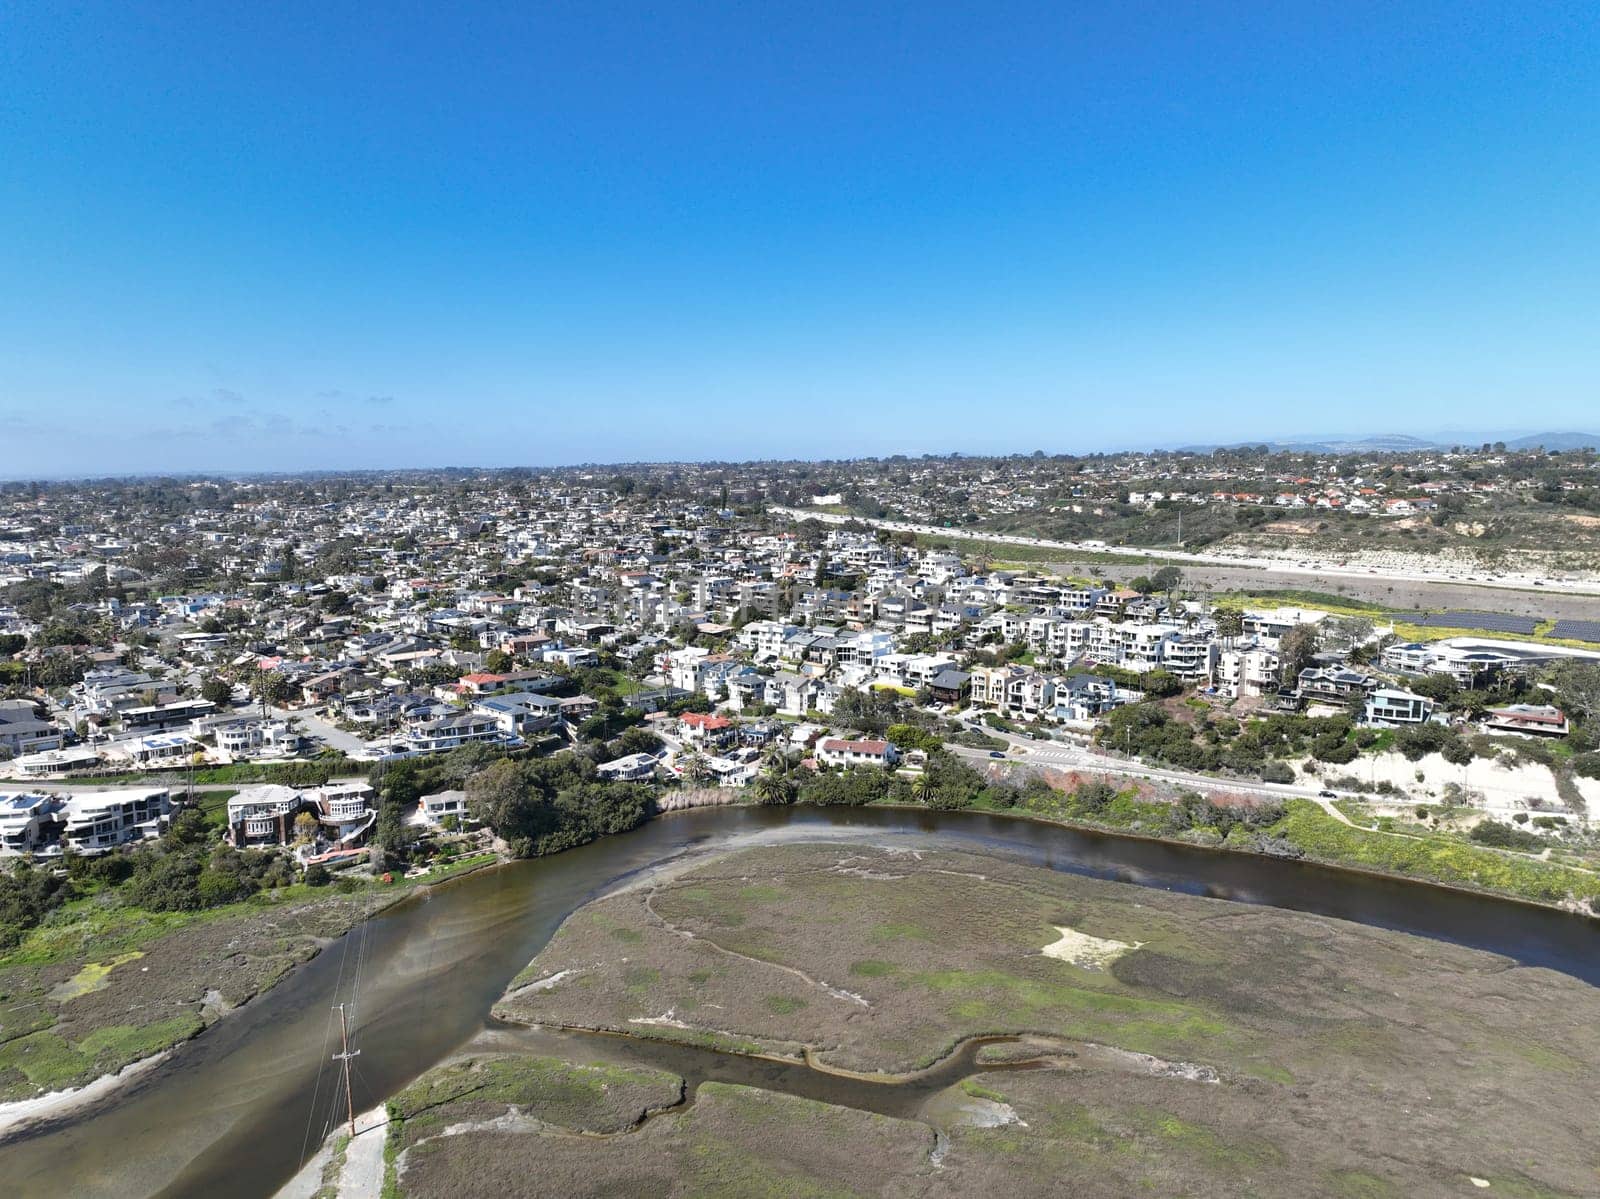 Aerial view of Wealthy Encinitas town in San Diego South California, USA.